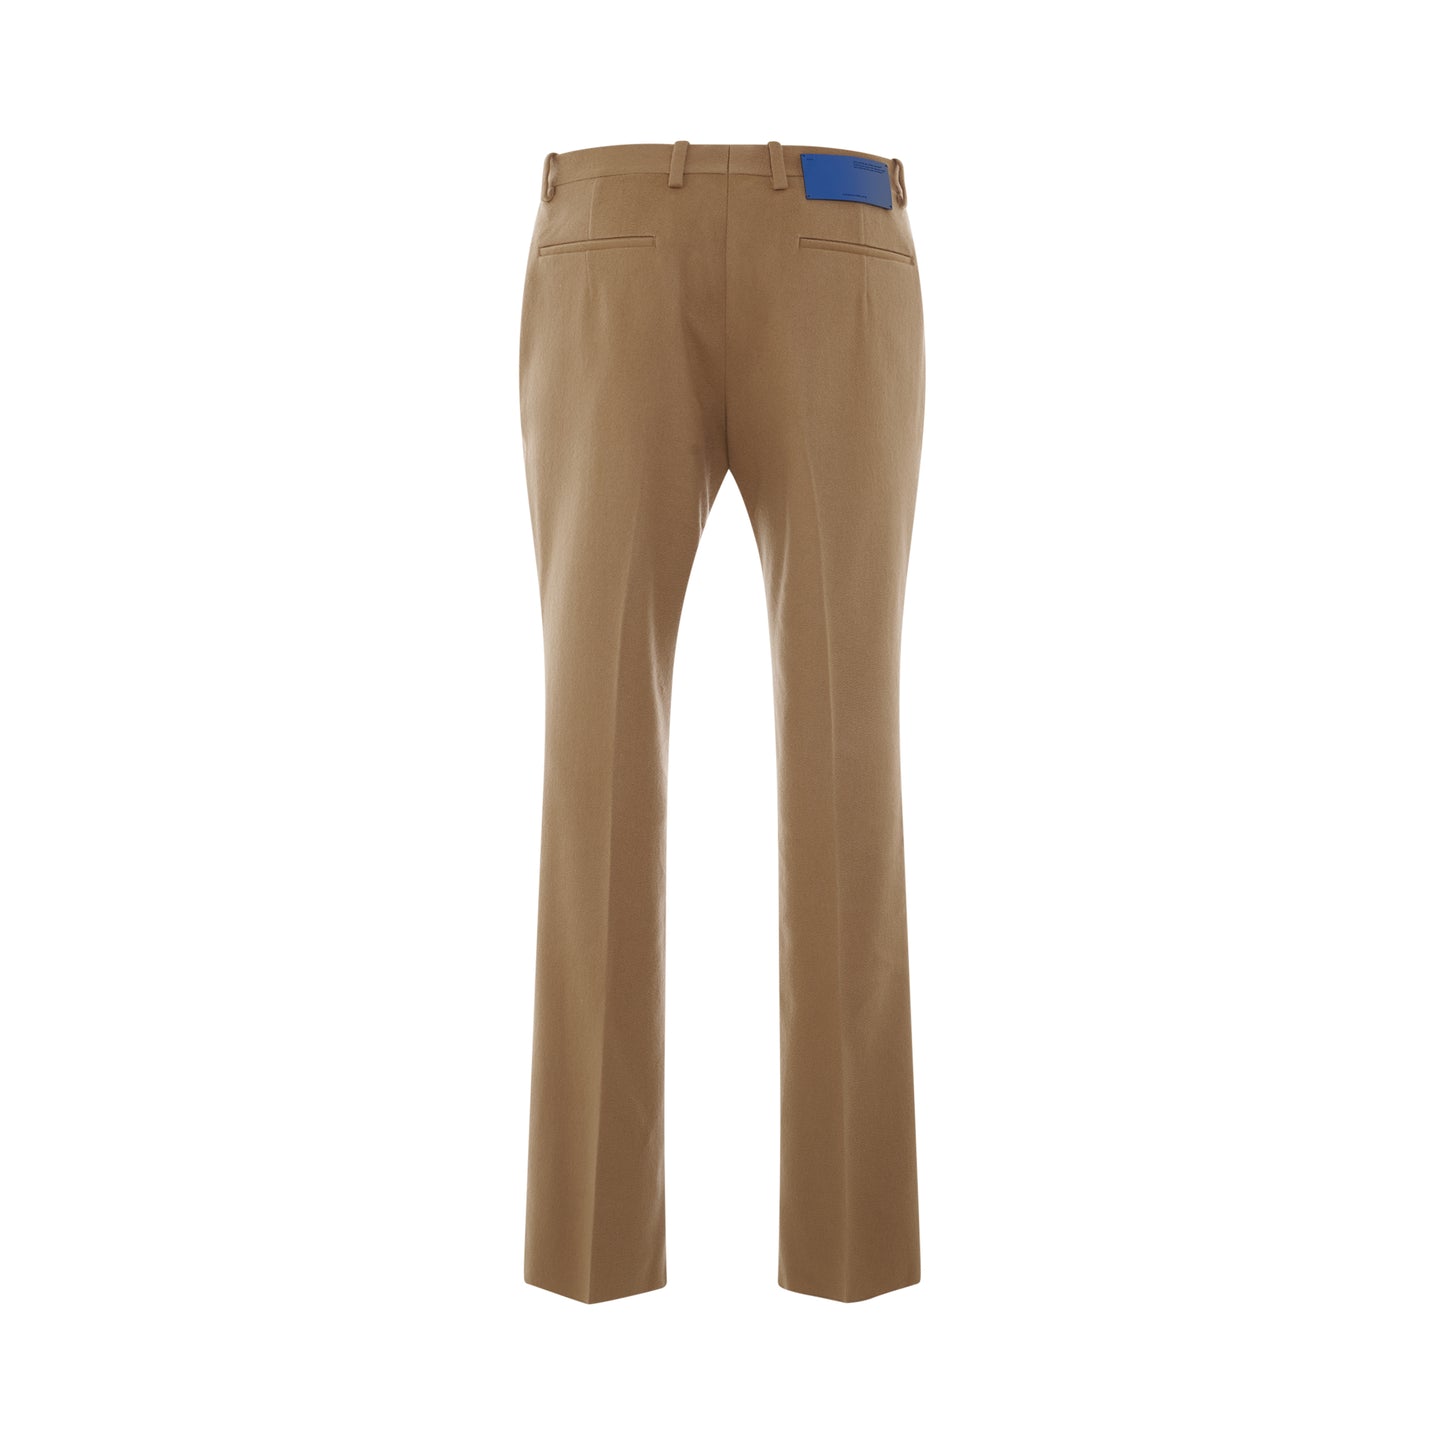 Tags Cashmere Slim Pant in Camel